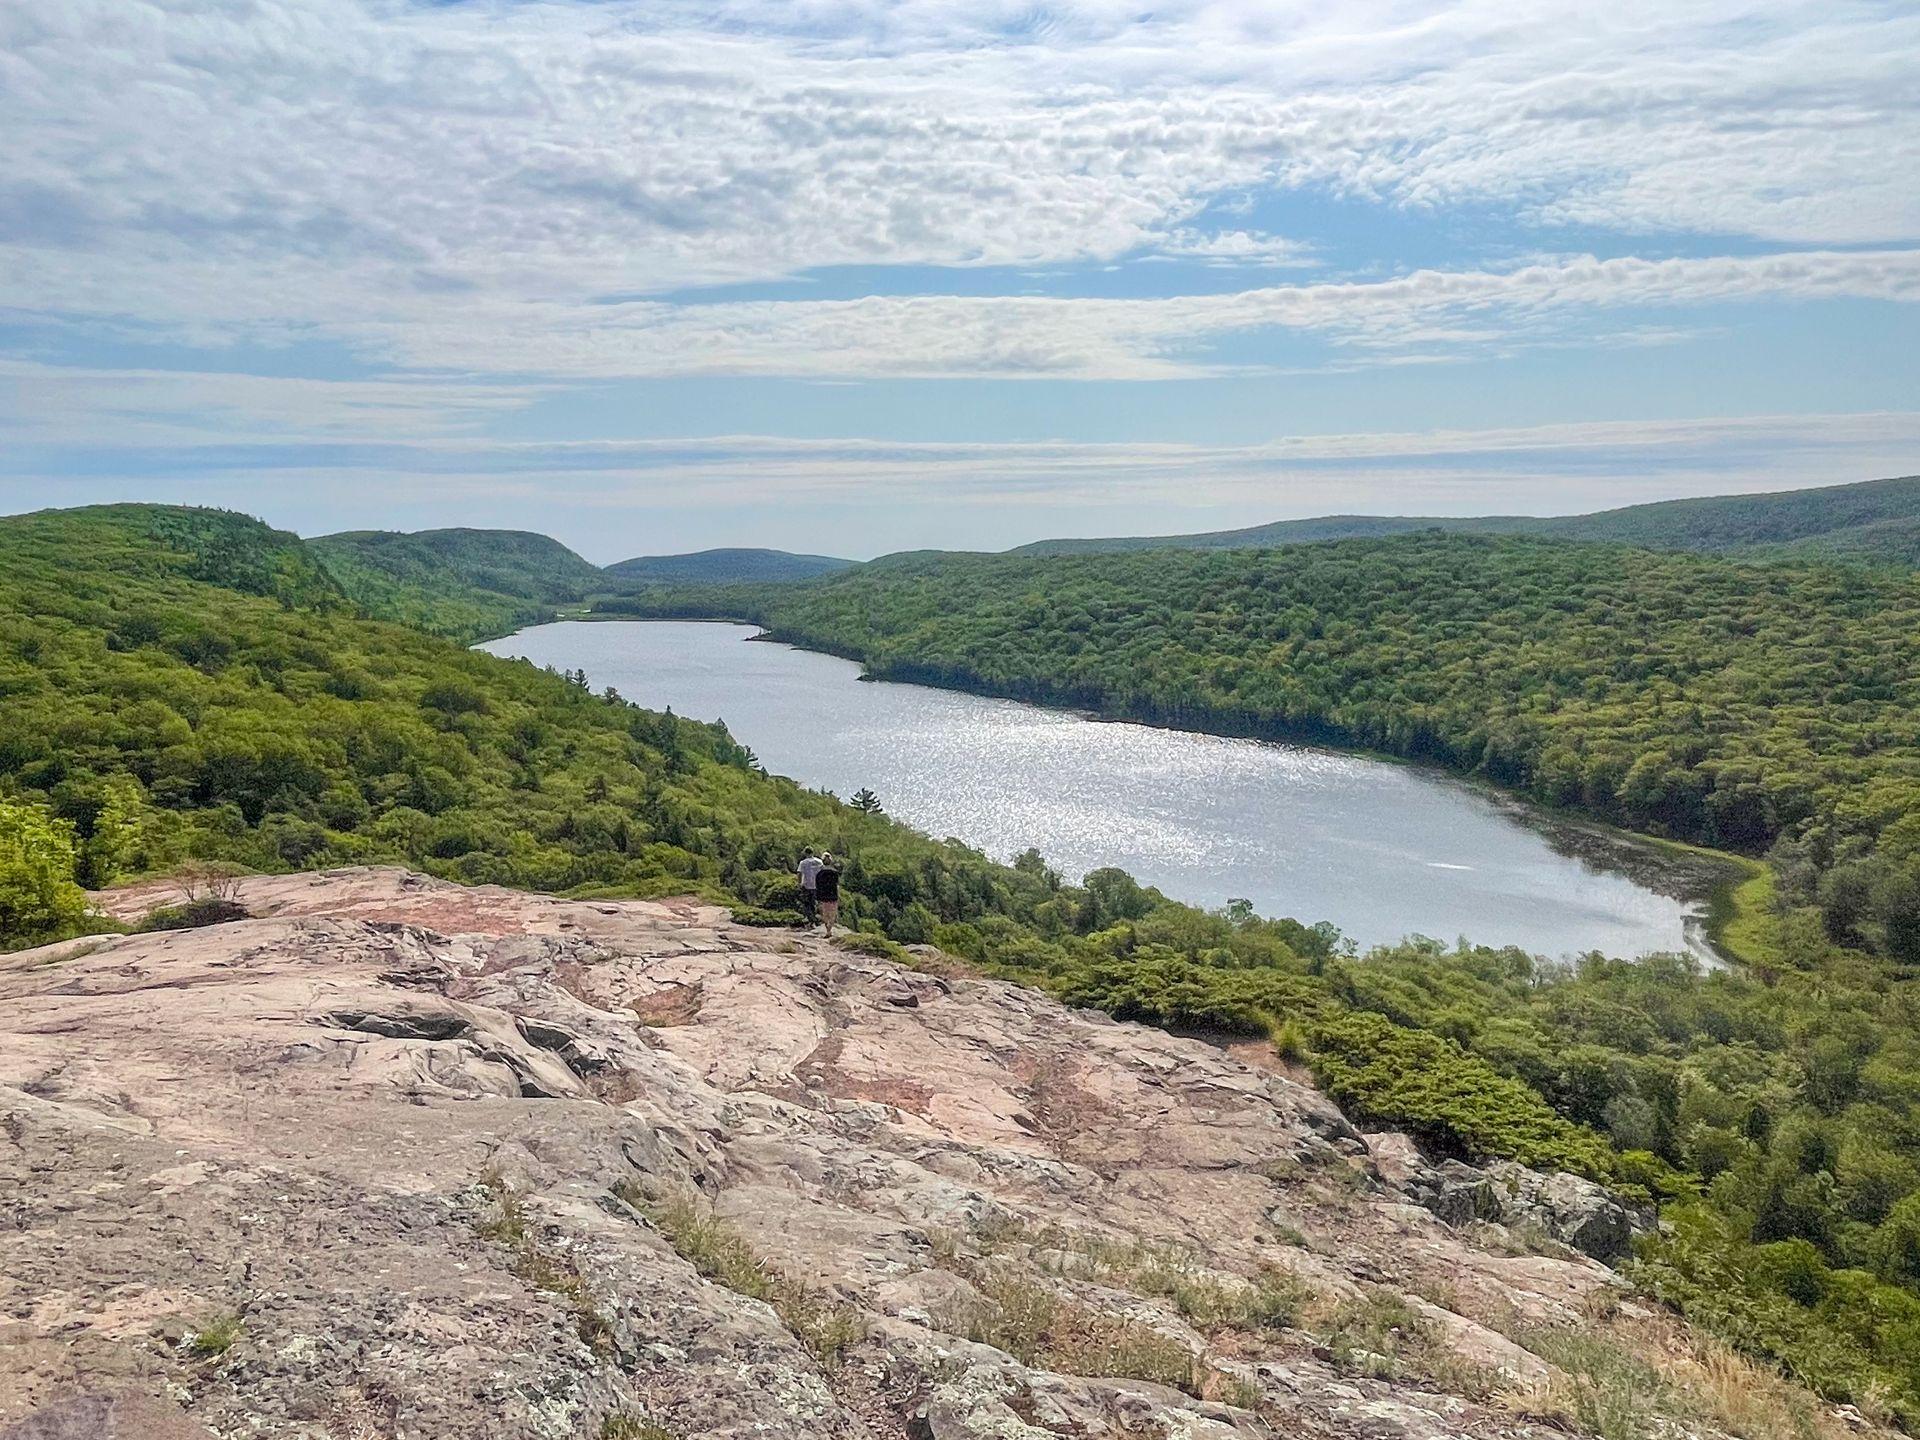 A lake surrounded by trees seen from a rocky area on the Escarpment Trail